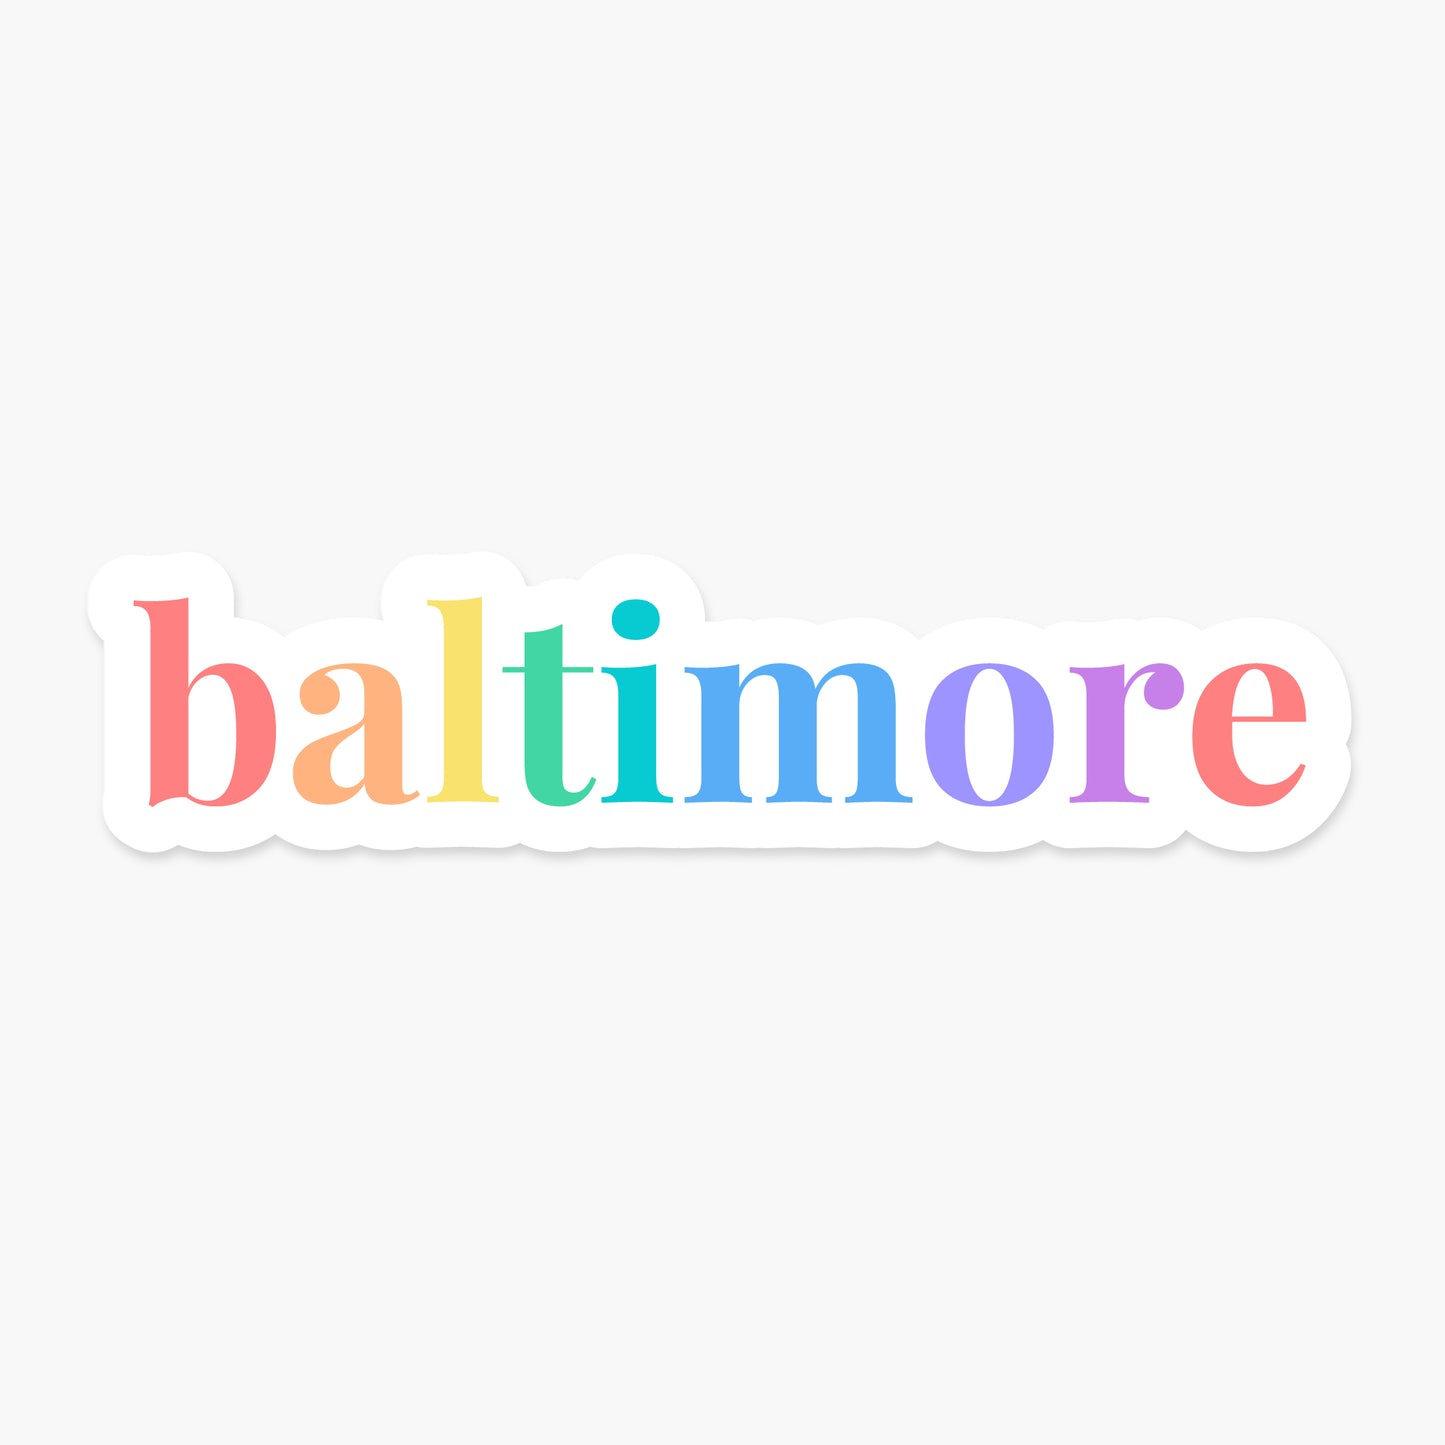 Baltimore, Maryland - Everyday Sticker | Footnotes Paper